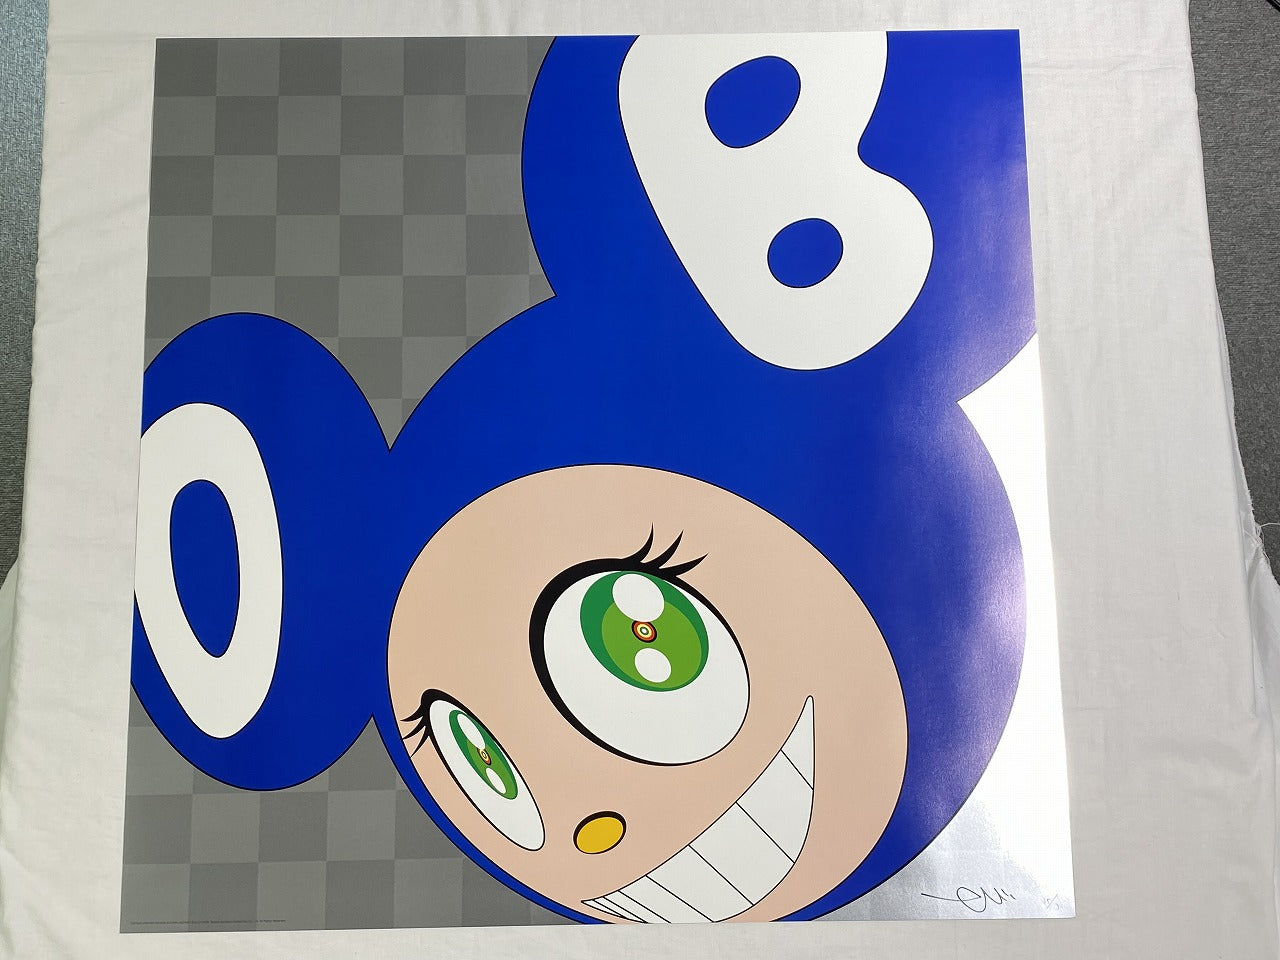 Takashi Murakami - And then and then and then and then and then (Blue)